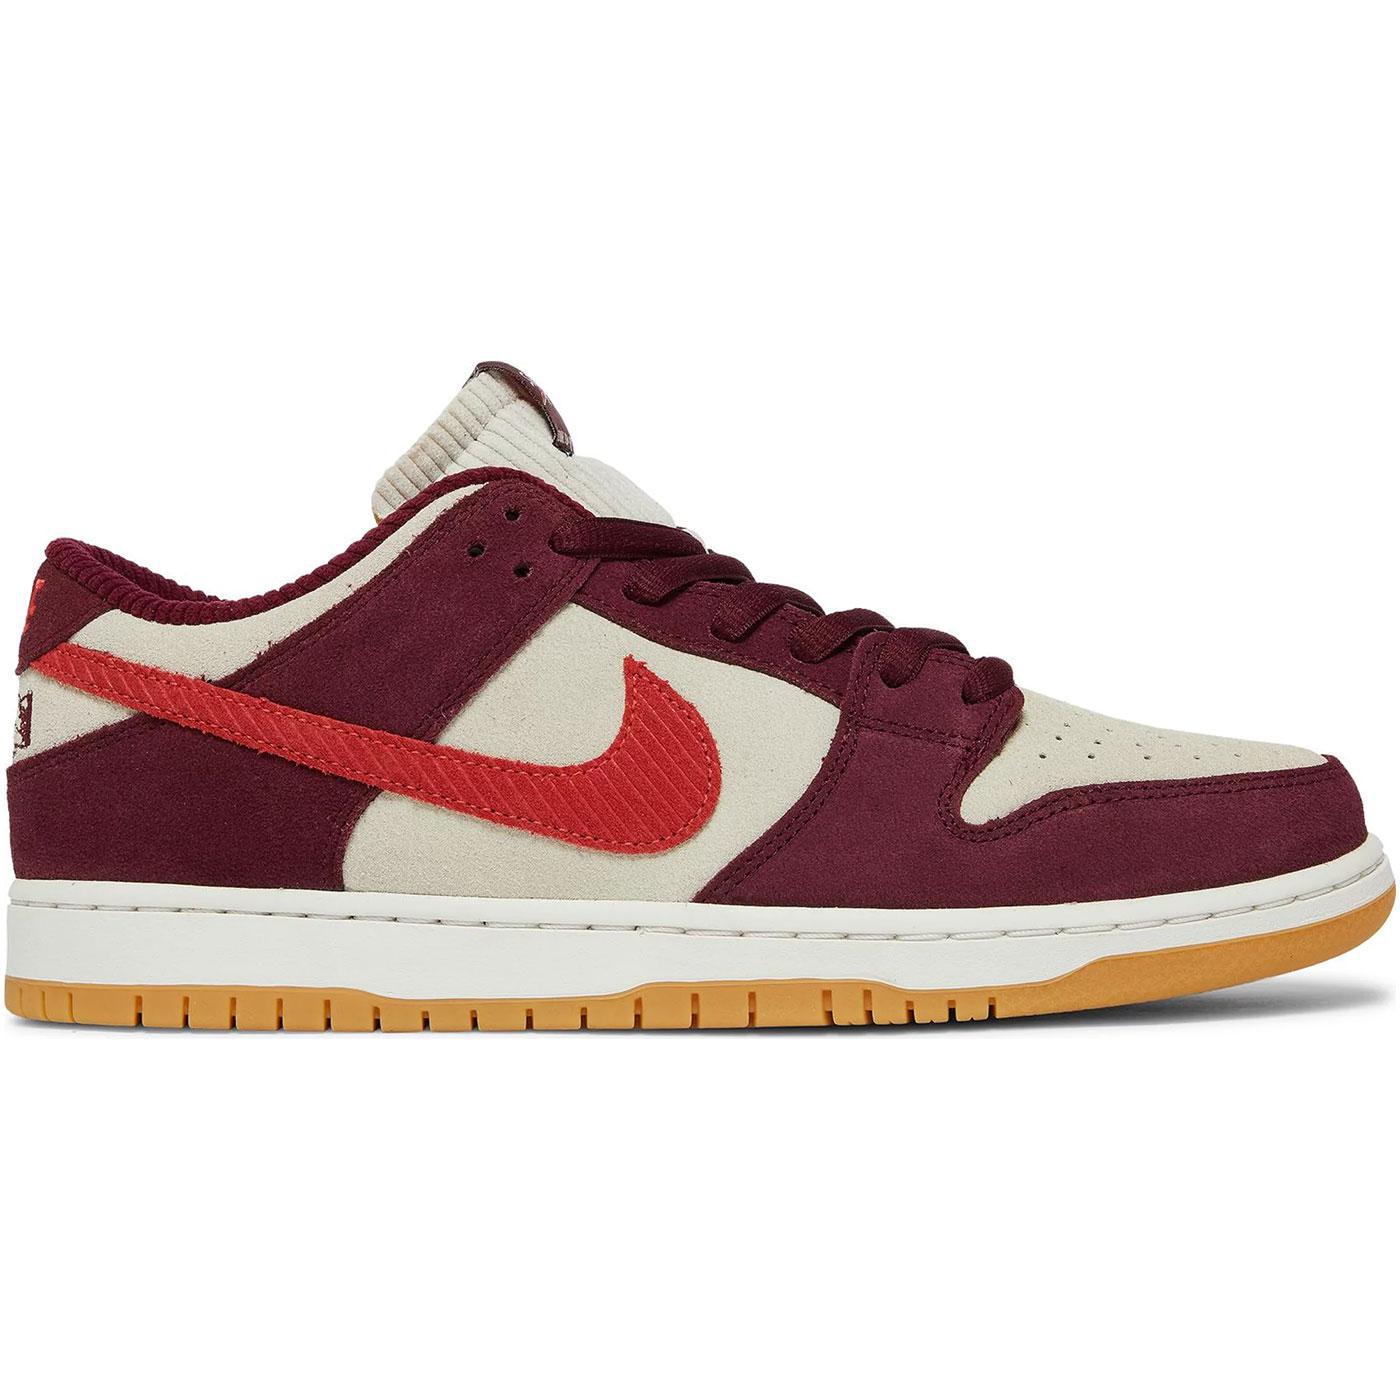  Nike Youth Dunk Low GS DC9561 300 Toasty Sequoia - Size 4Y